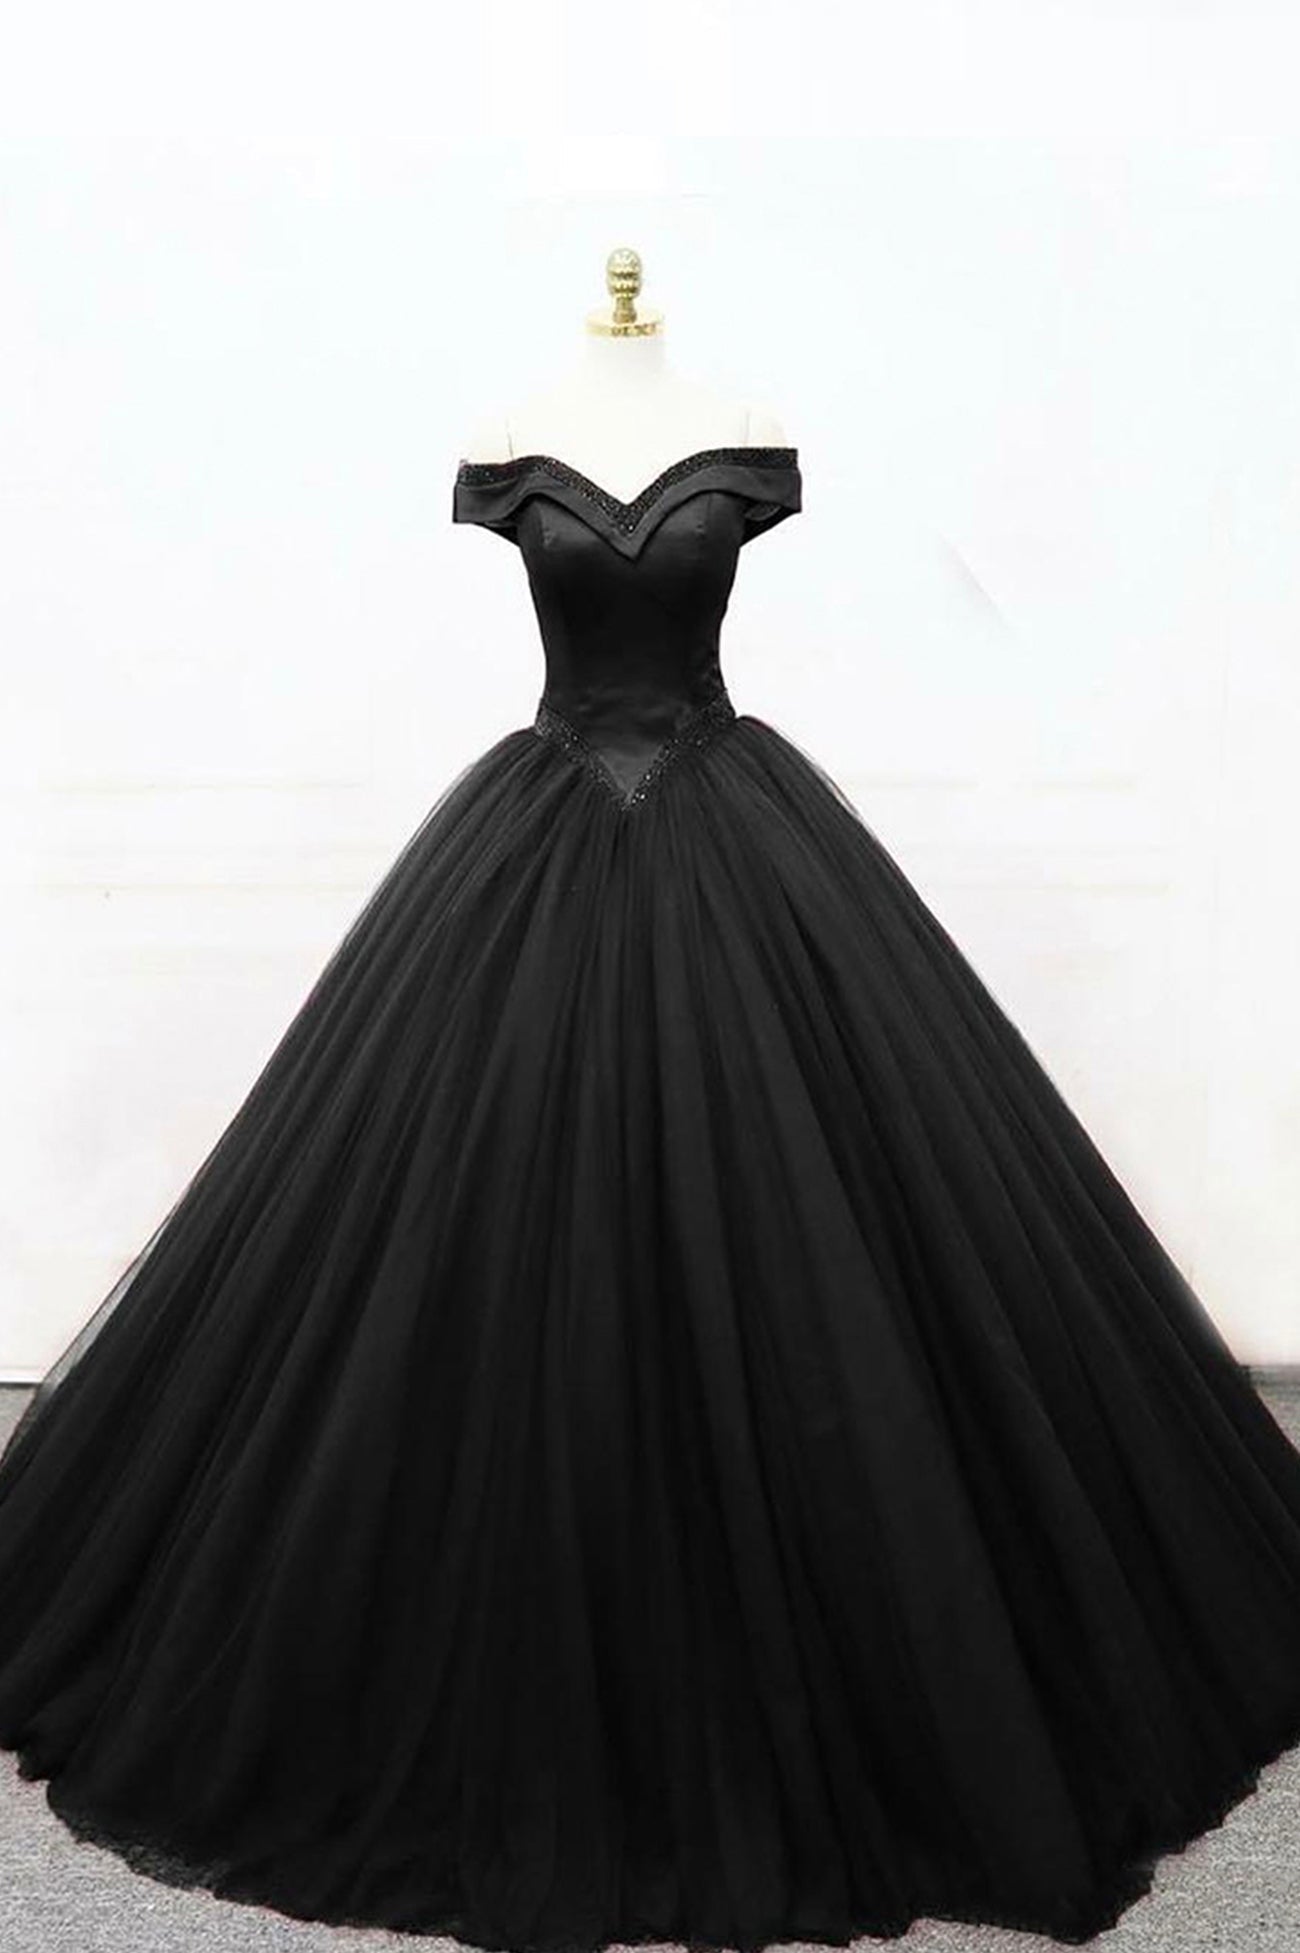 Prom Dress Website, Black Tulle Beaded Long Ball Gown, A-Line Off the Shoulder Evening Formal Gown